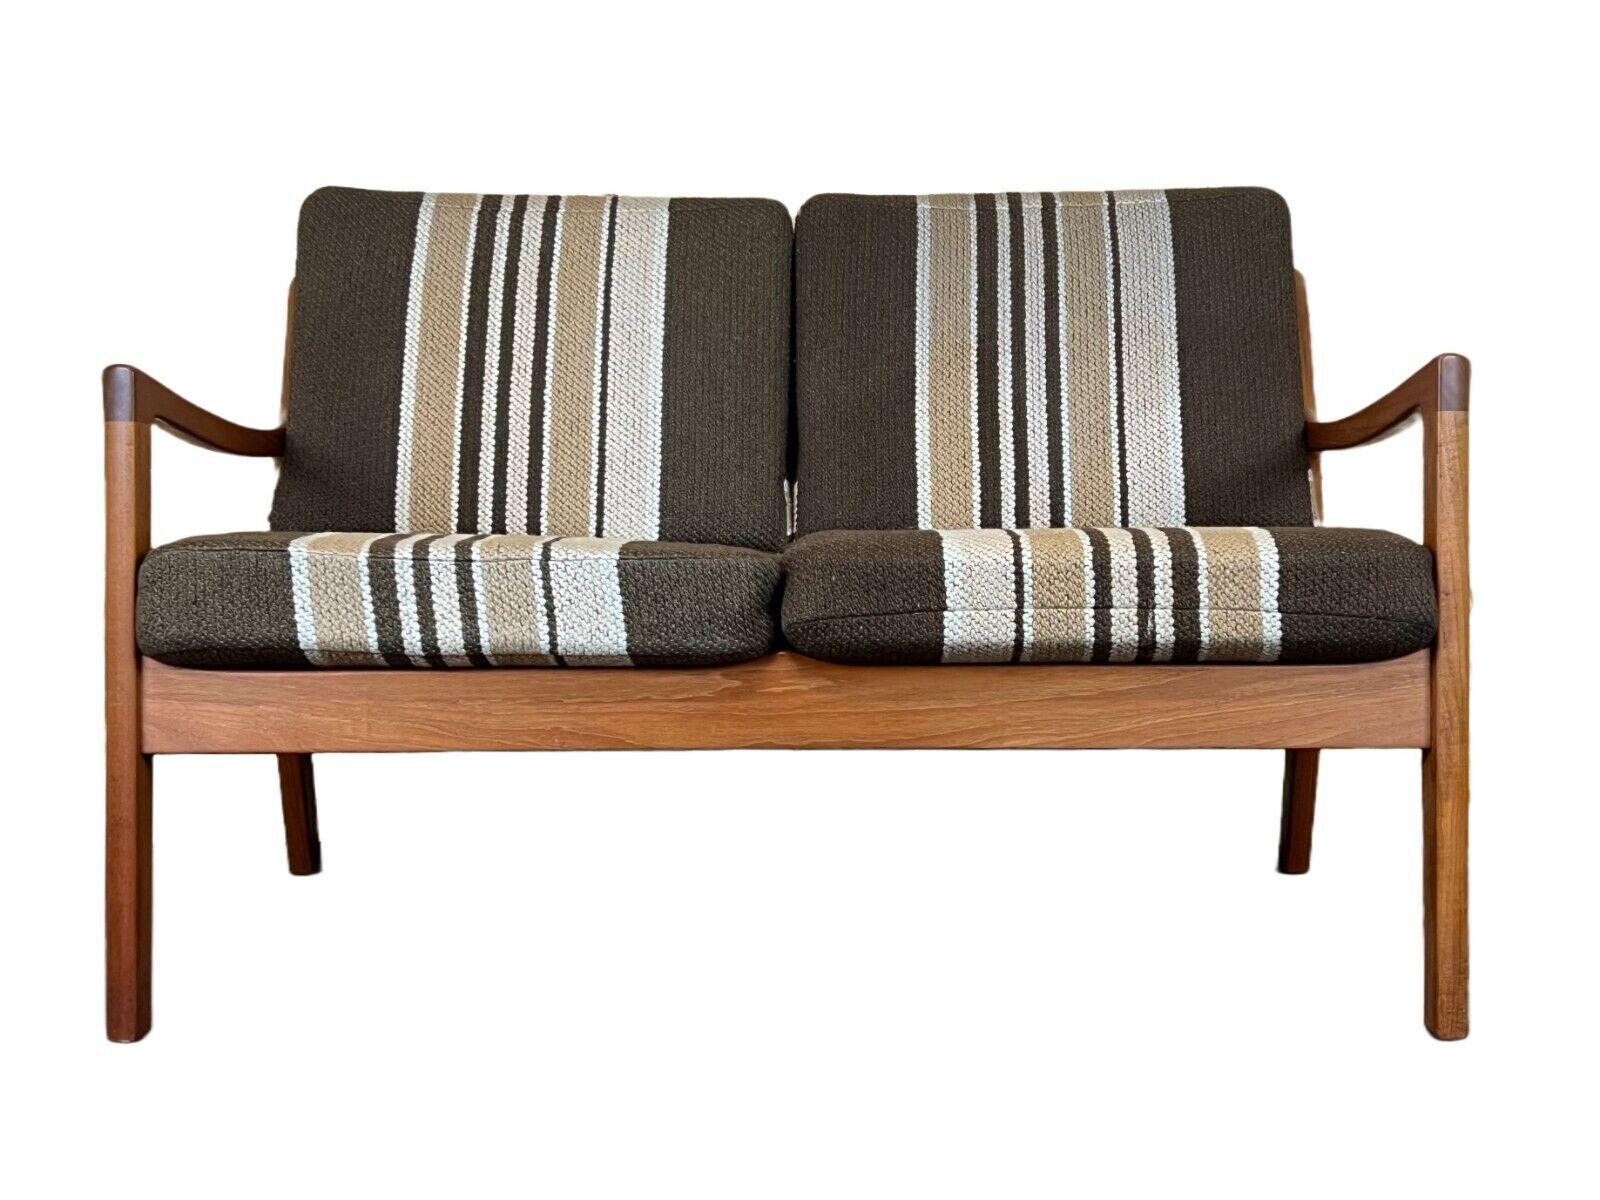 1960s-1970s teak 2 seater sofa couch Ole Wanscher Cado France & Son Danish design

Object: 2-seater sofa

Manufacturer: Cado (France & Son)

Condition: Good - vintage

Age: around 1960-1970

Dimensions:

Width = 125cm
Depth =